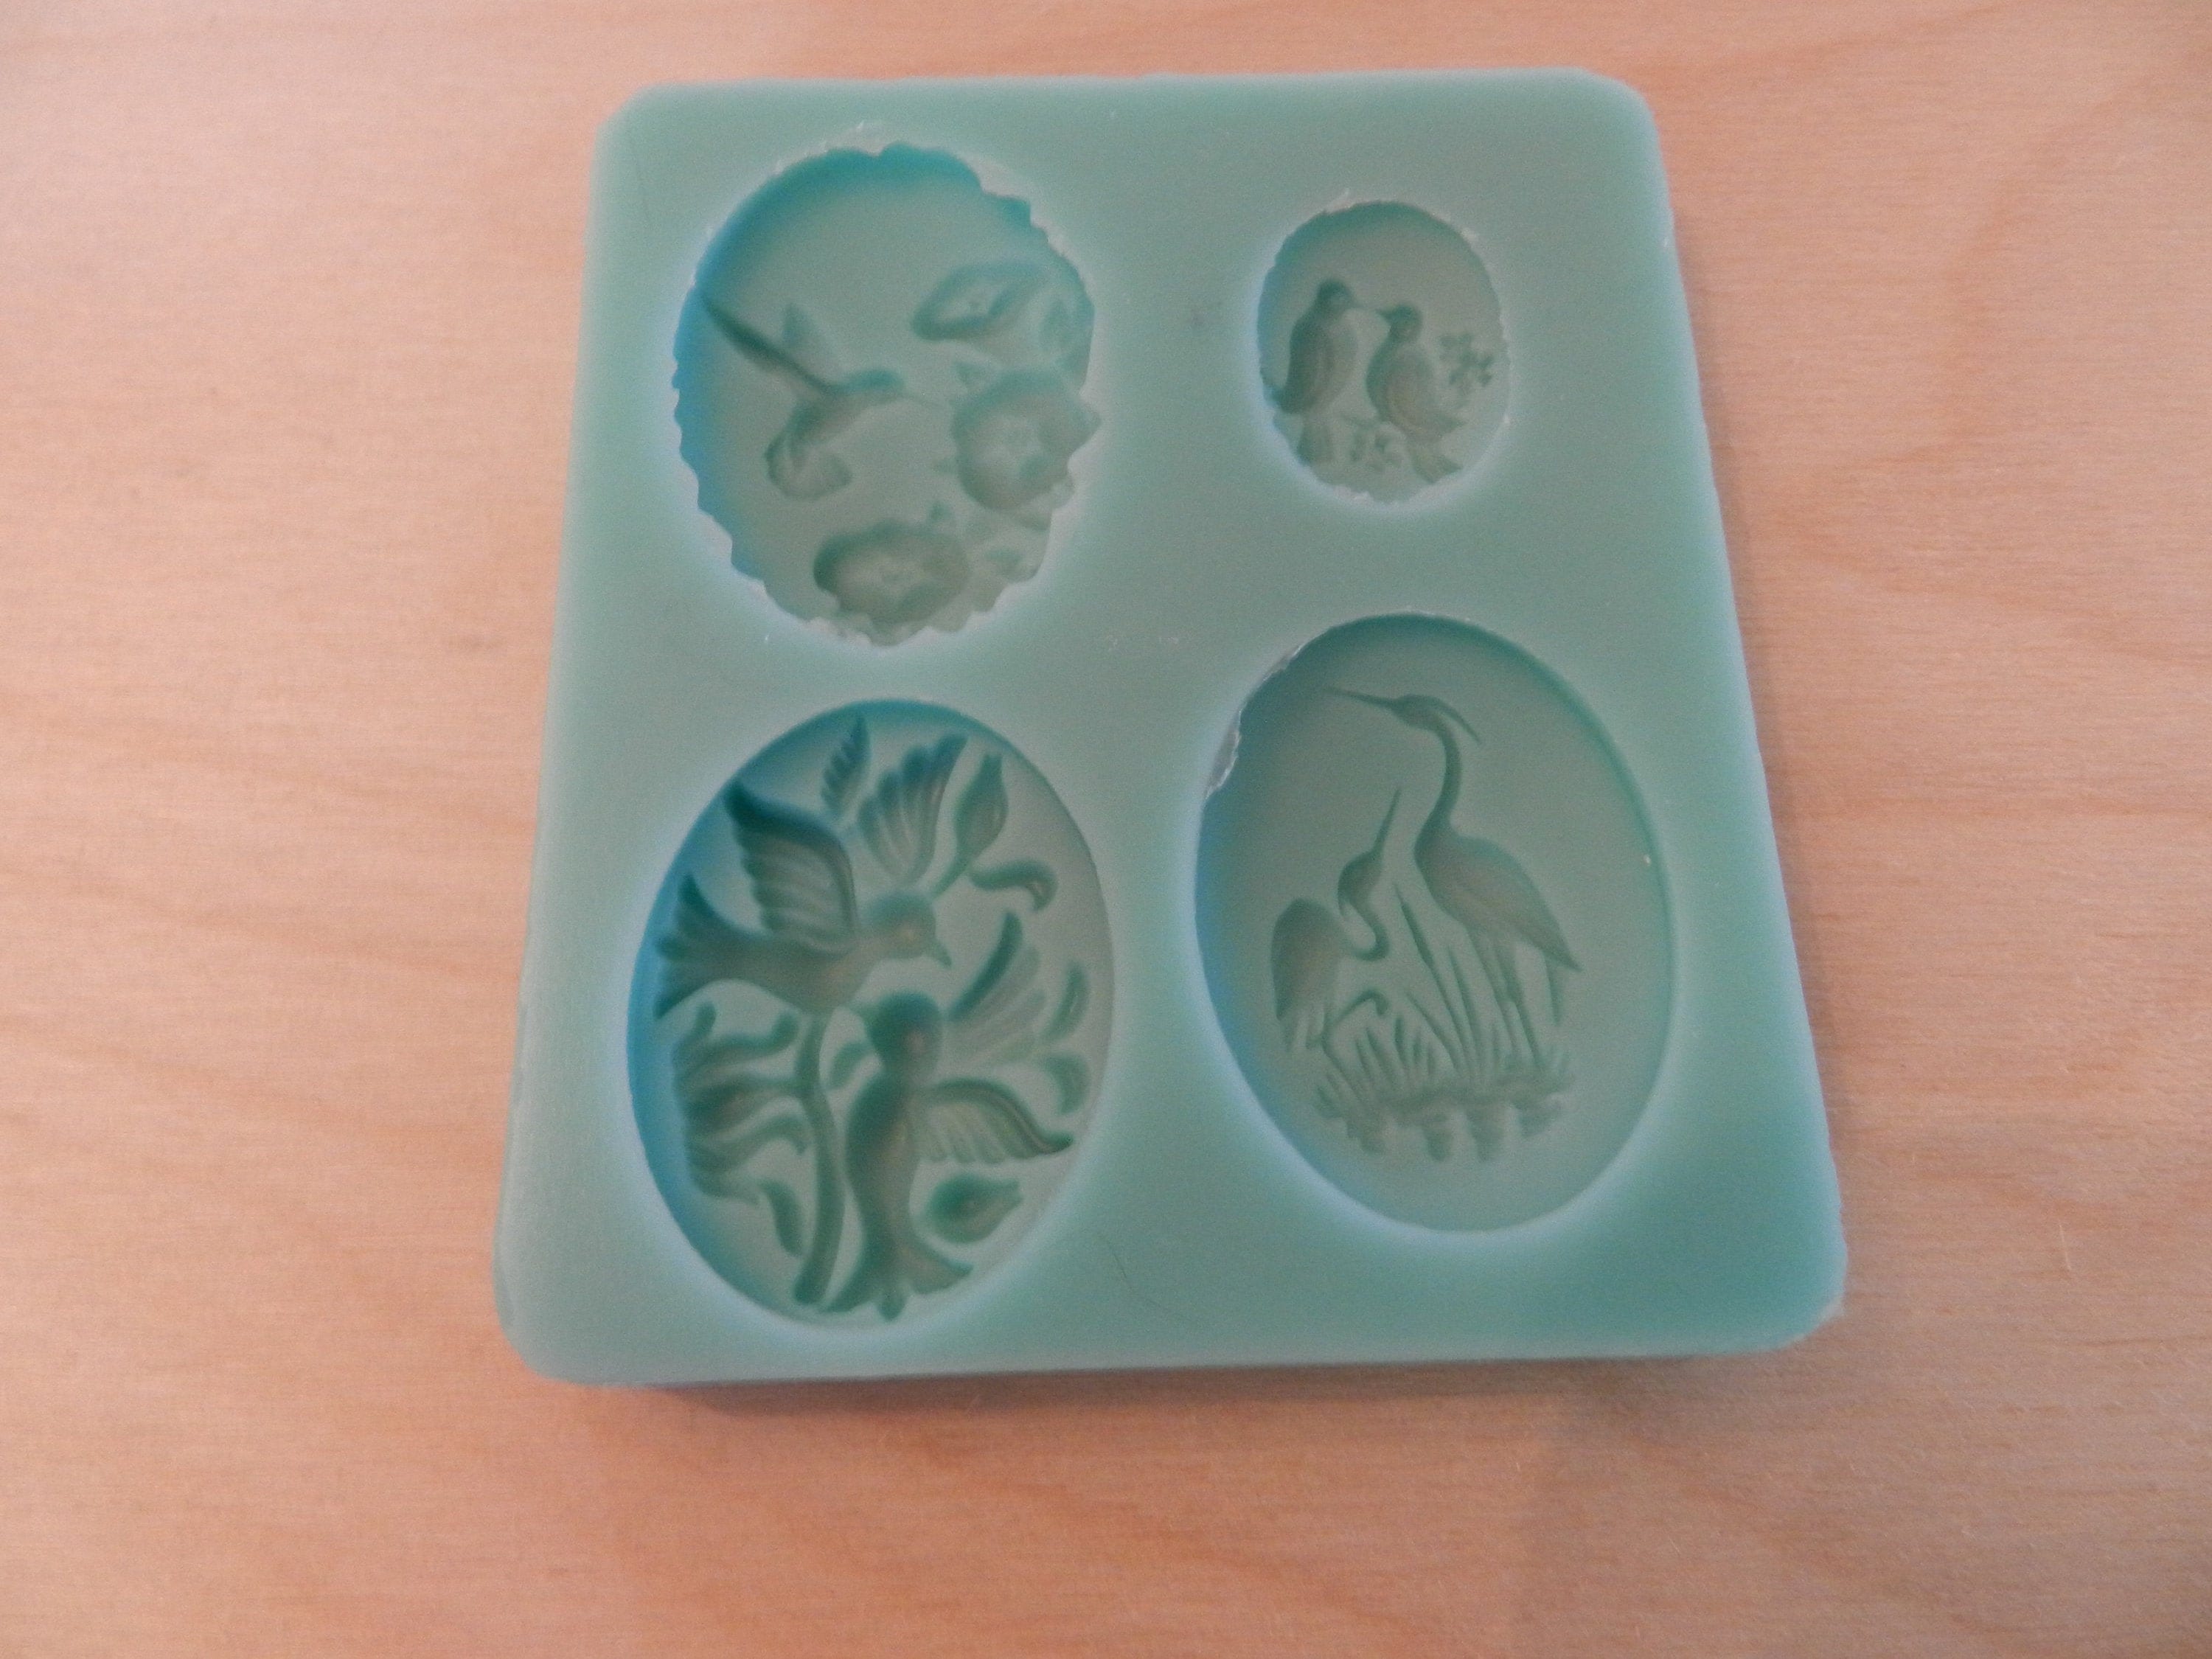 5 White Intaglio Silicone Resin Mold by hildie & jo